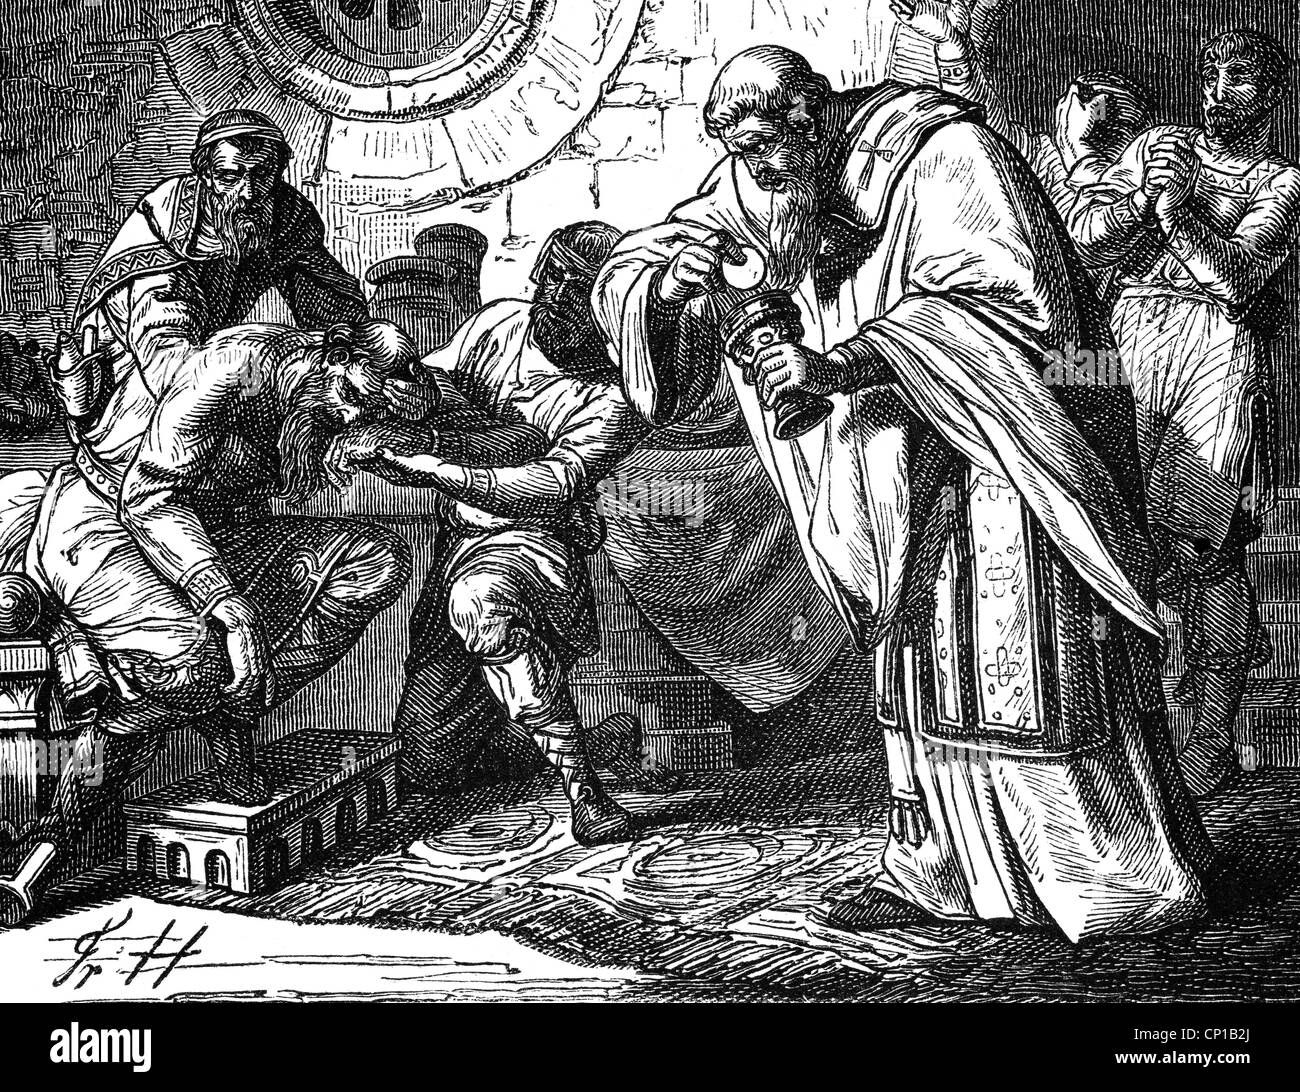 Otto I 'the Great', 23.11.912 - 7.5.973, Holy Roman Emperor 2.2.962 - 7.5.973, death at Memsleben, Thuringia, after Friedrich Hottenroth (1840 - 1917), wood engraving, 19th century, , Stock Photo